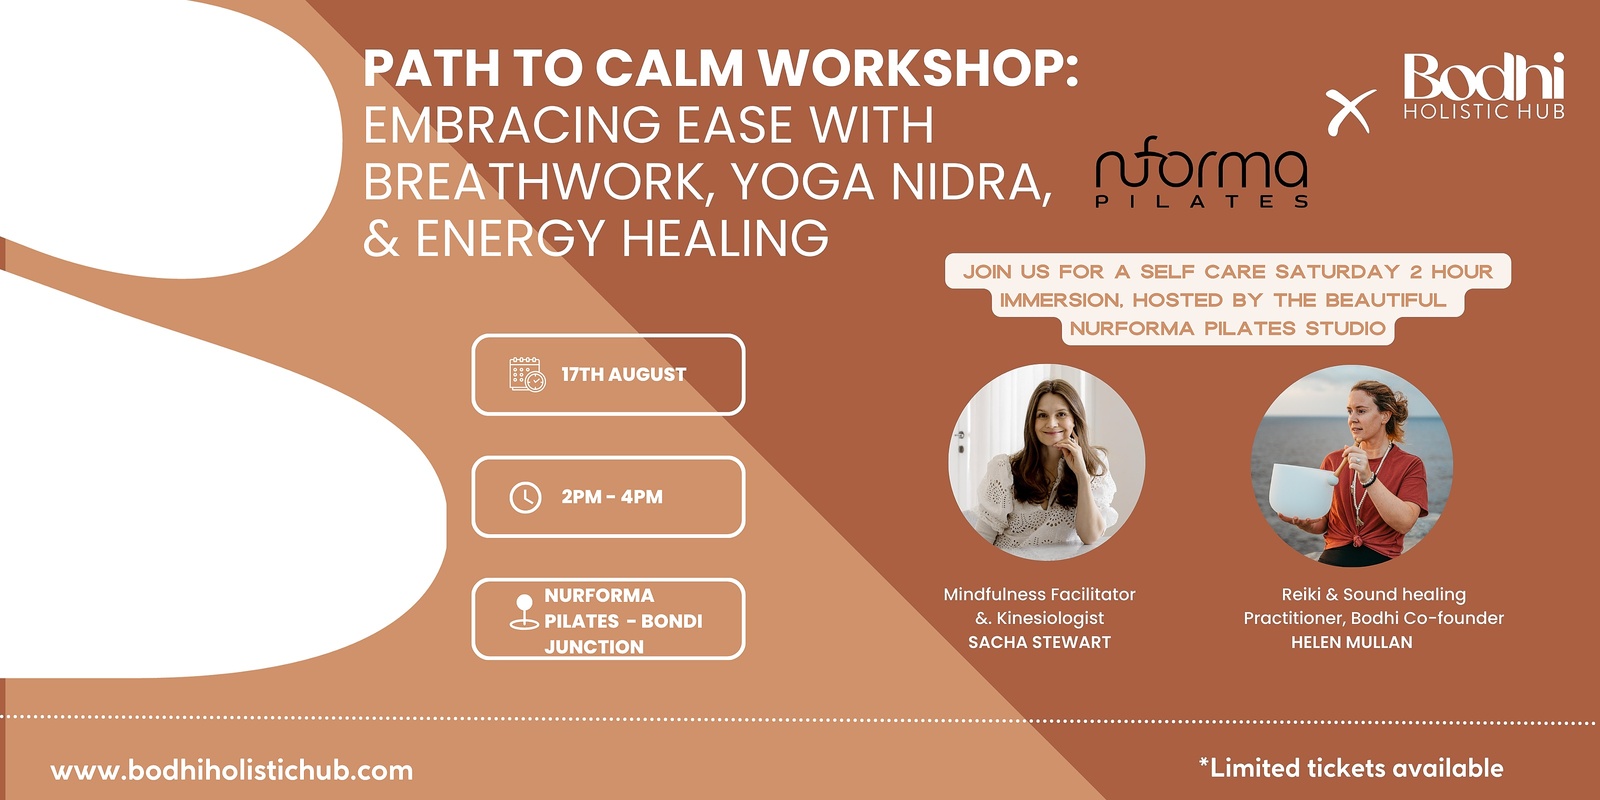 Banner image for Path to Calm Workshop: Embracing Ease with Breathwork, Yoga Nidra, & Energy Healing